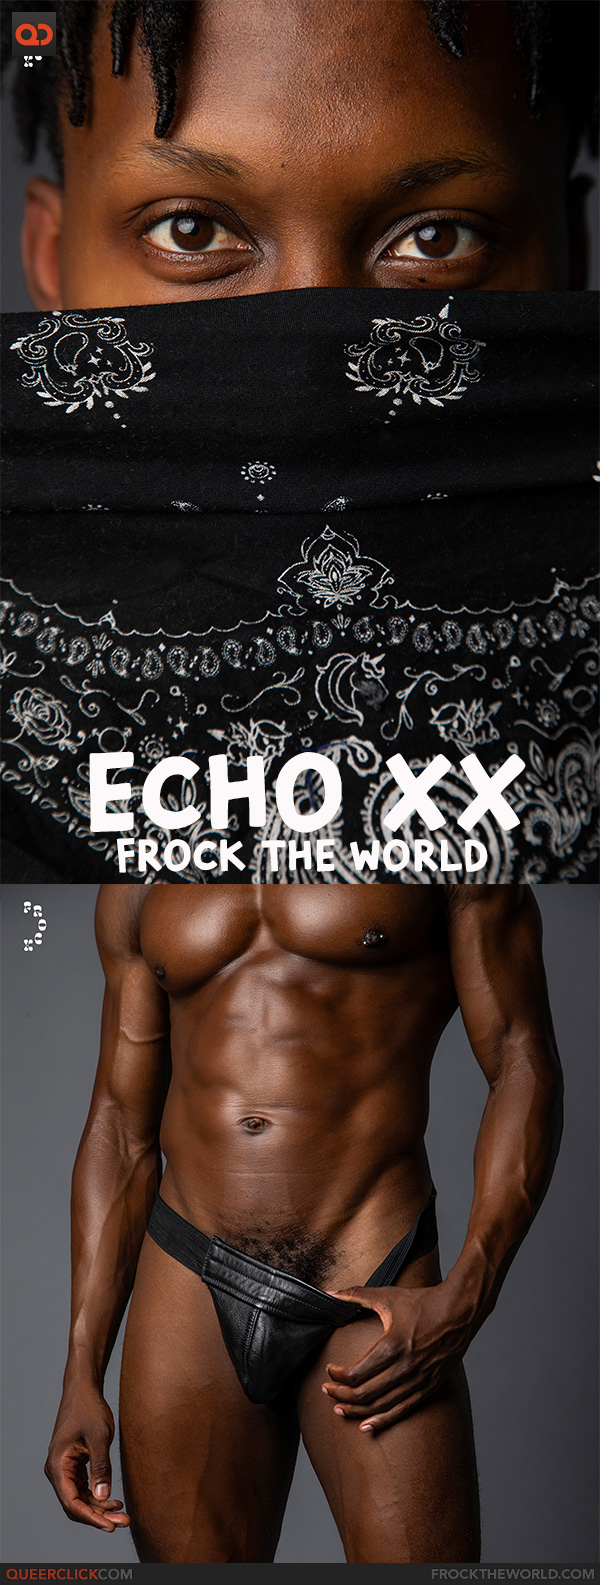 Frock The World: Echo XX - An Anonymous Act - BLACK FRIDAY SAVINGS!